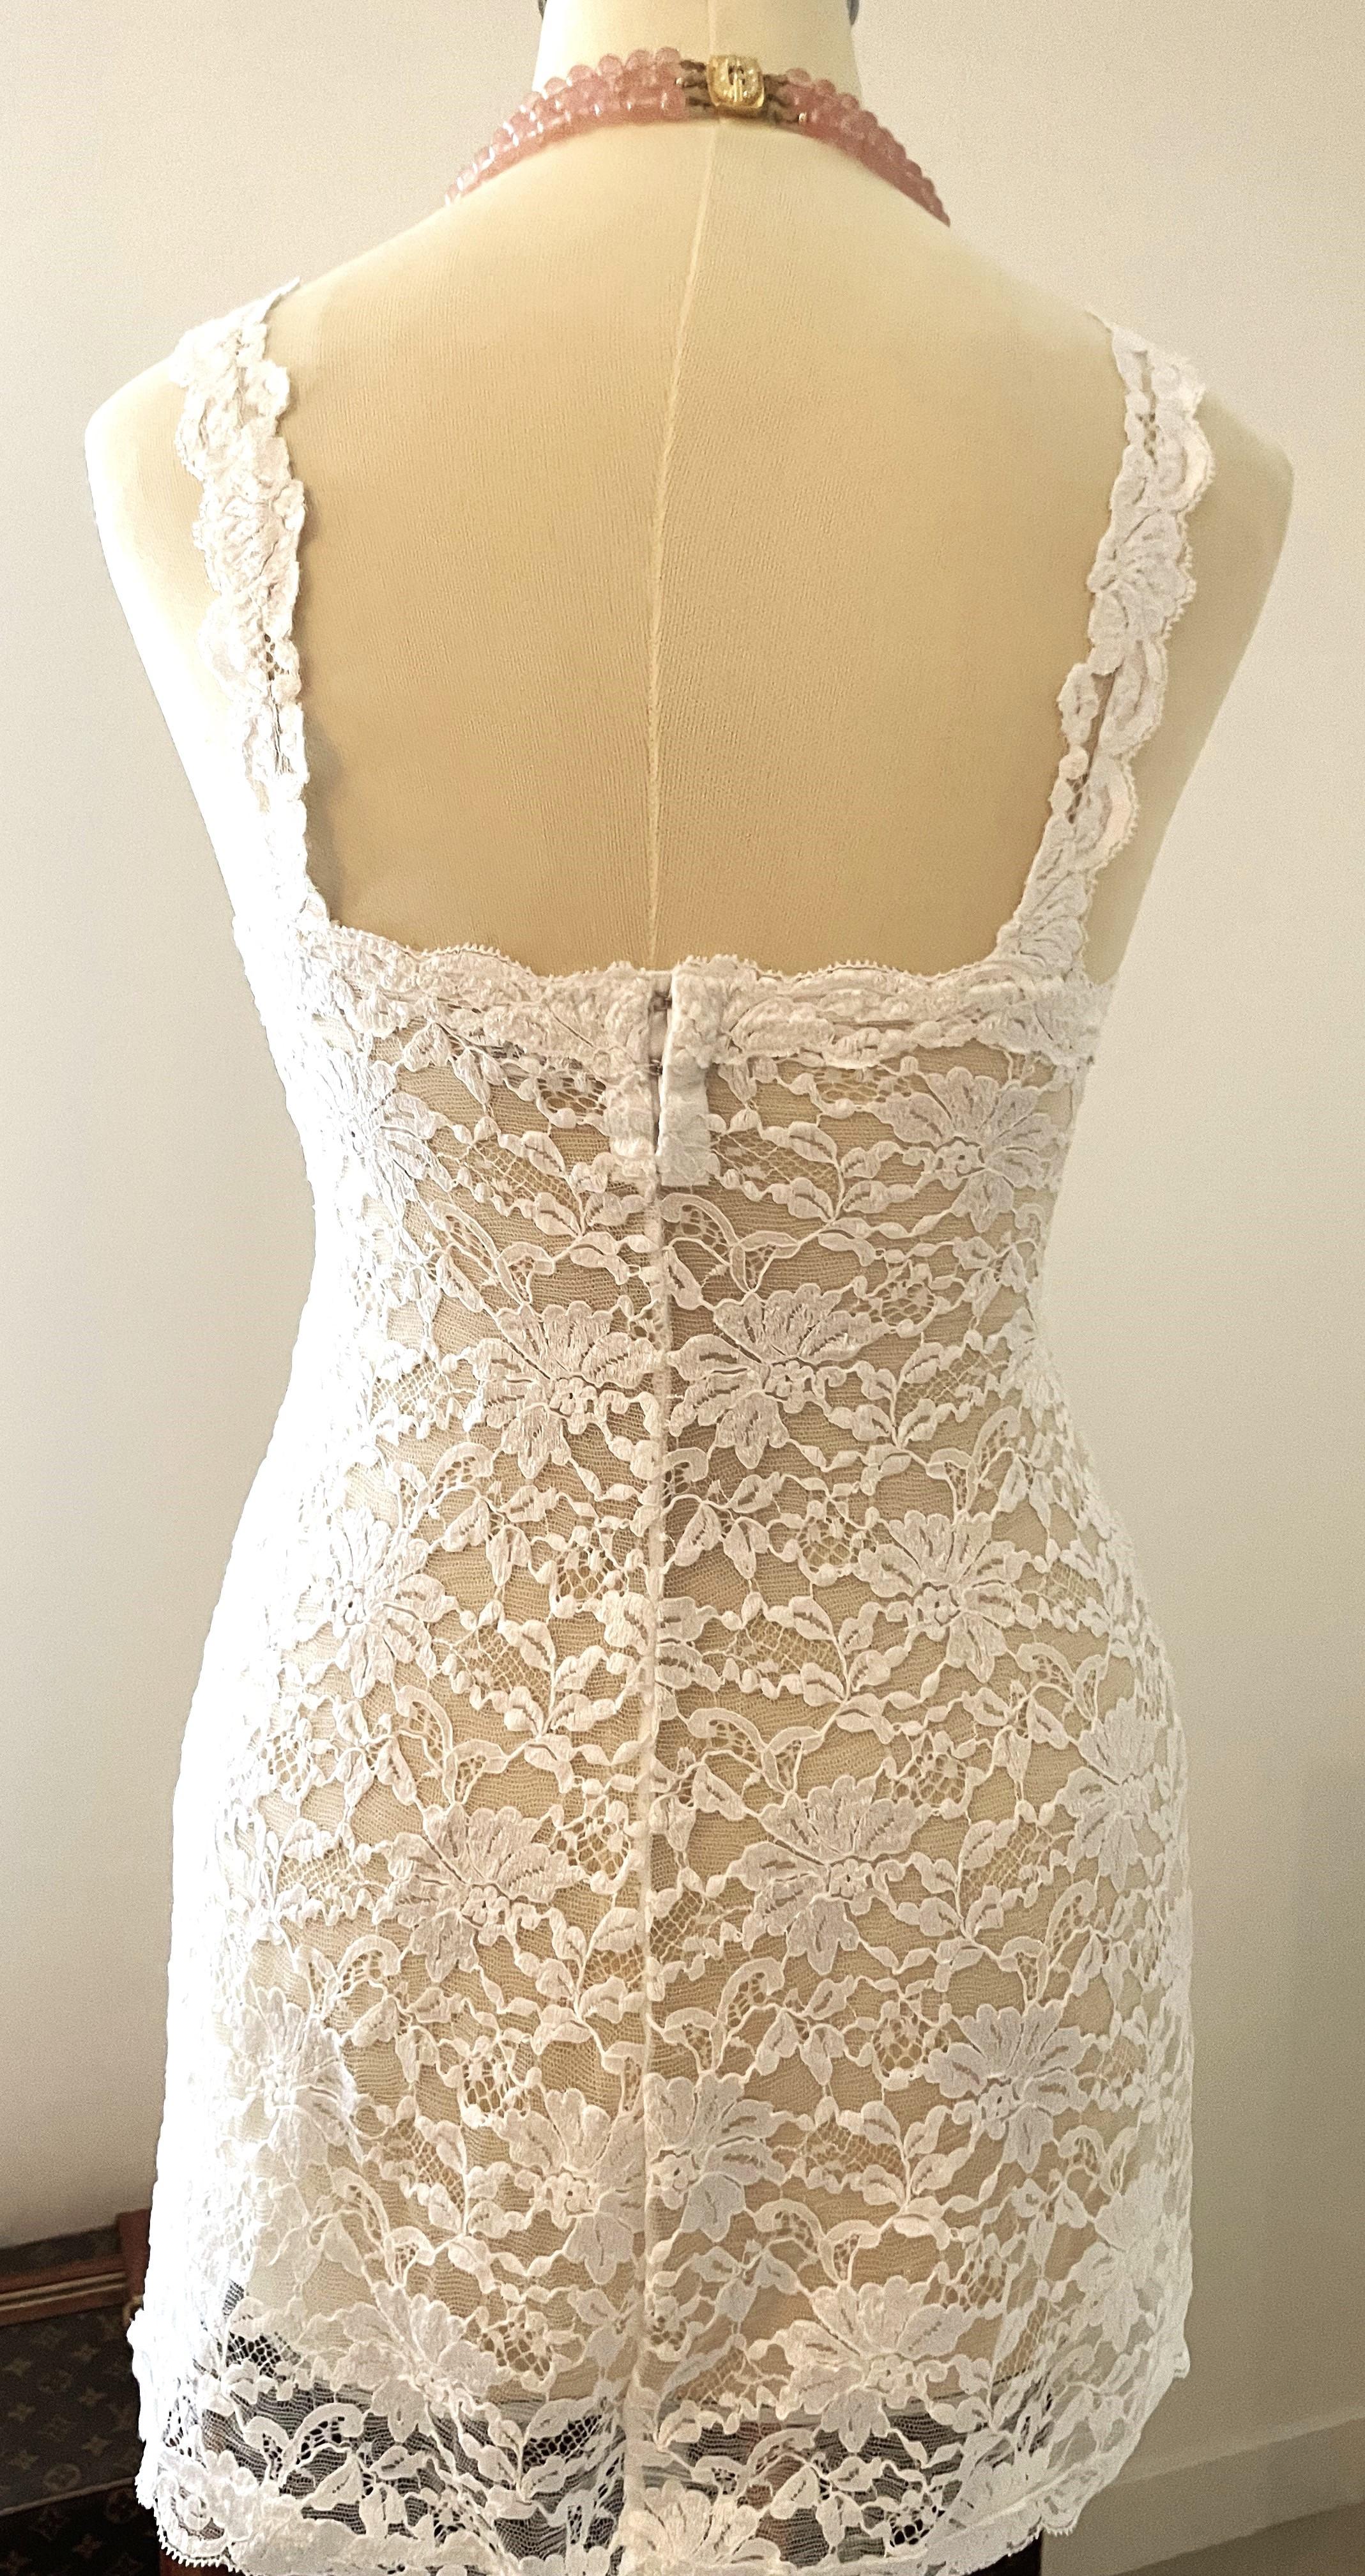 Vintage 90s very well kept La Perla Slip Dress in beautiful white lace. Perfect fit. Sexy but classy. The 